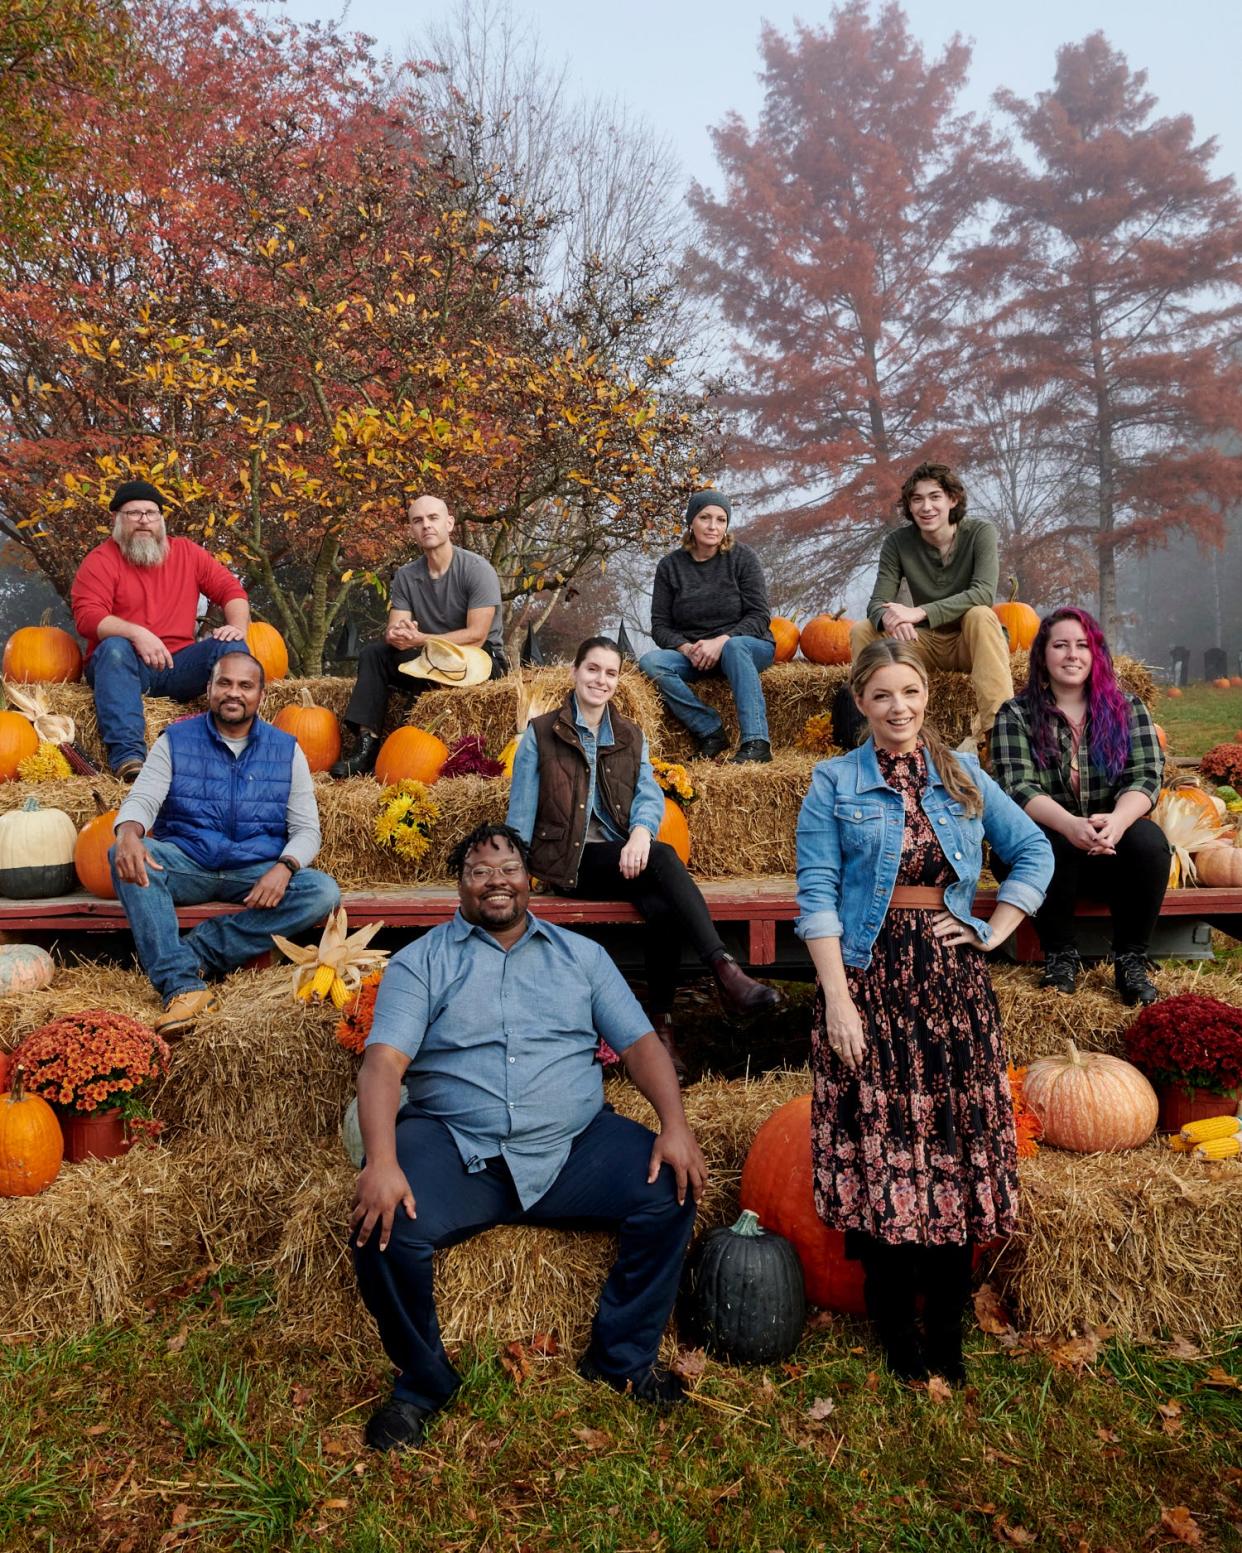 Group portrait of contestants (from top left): Daniel Miller, James Hall, Michele Vanderpyle-Hall, Ethan Anderson, Chaminda Weerappulige, Cassie Remillard, Rebecca DeGroot and Arthur Romeo with host Damaris Phillips as seen on "Outrageous Pumpkins" Season 4.